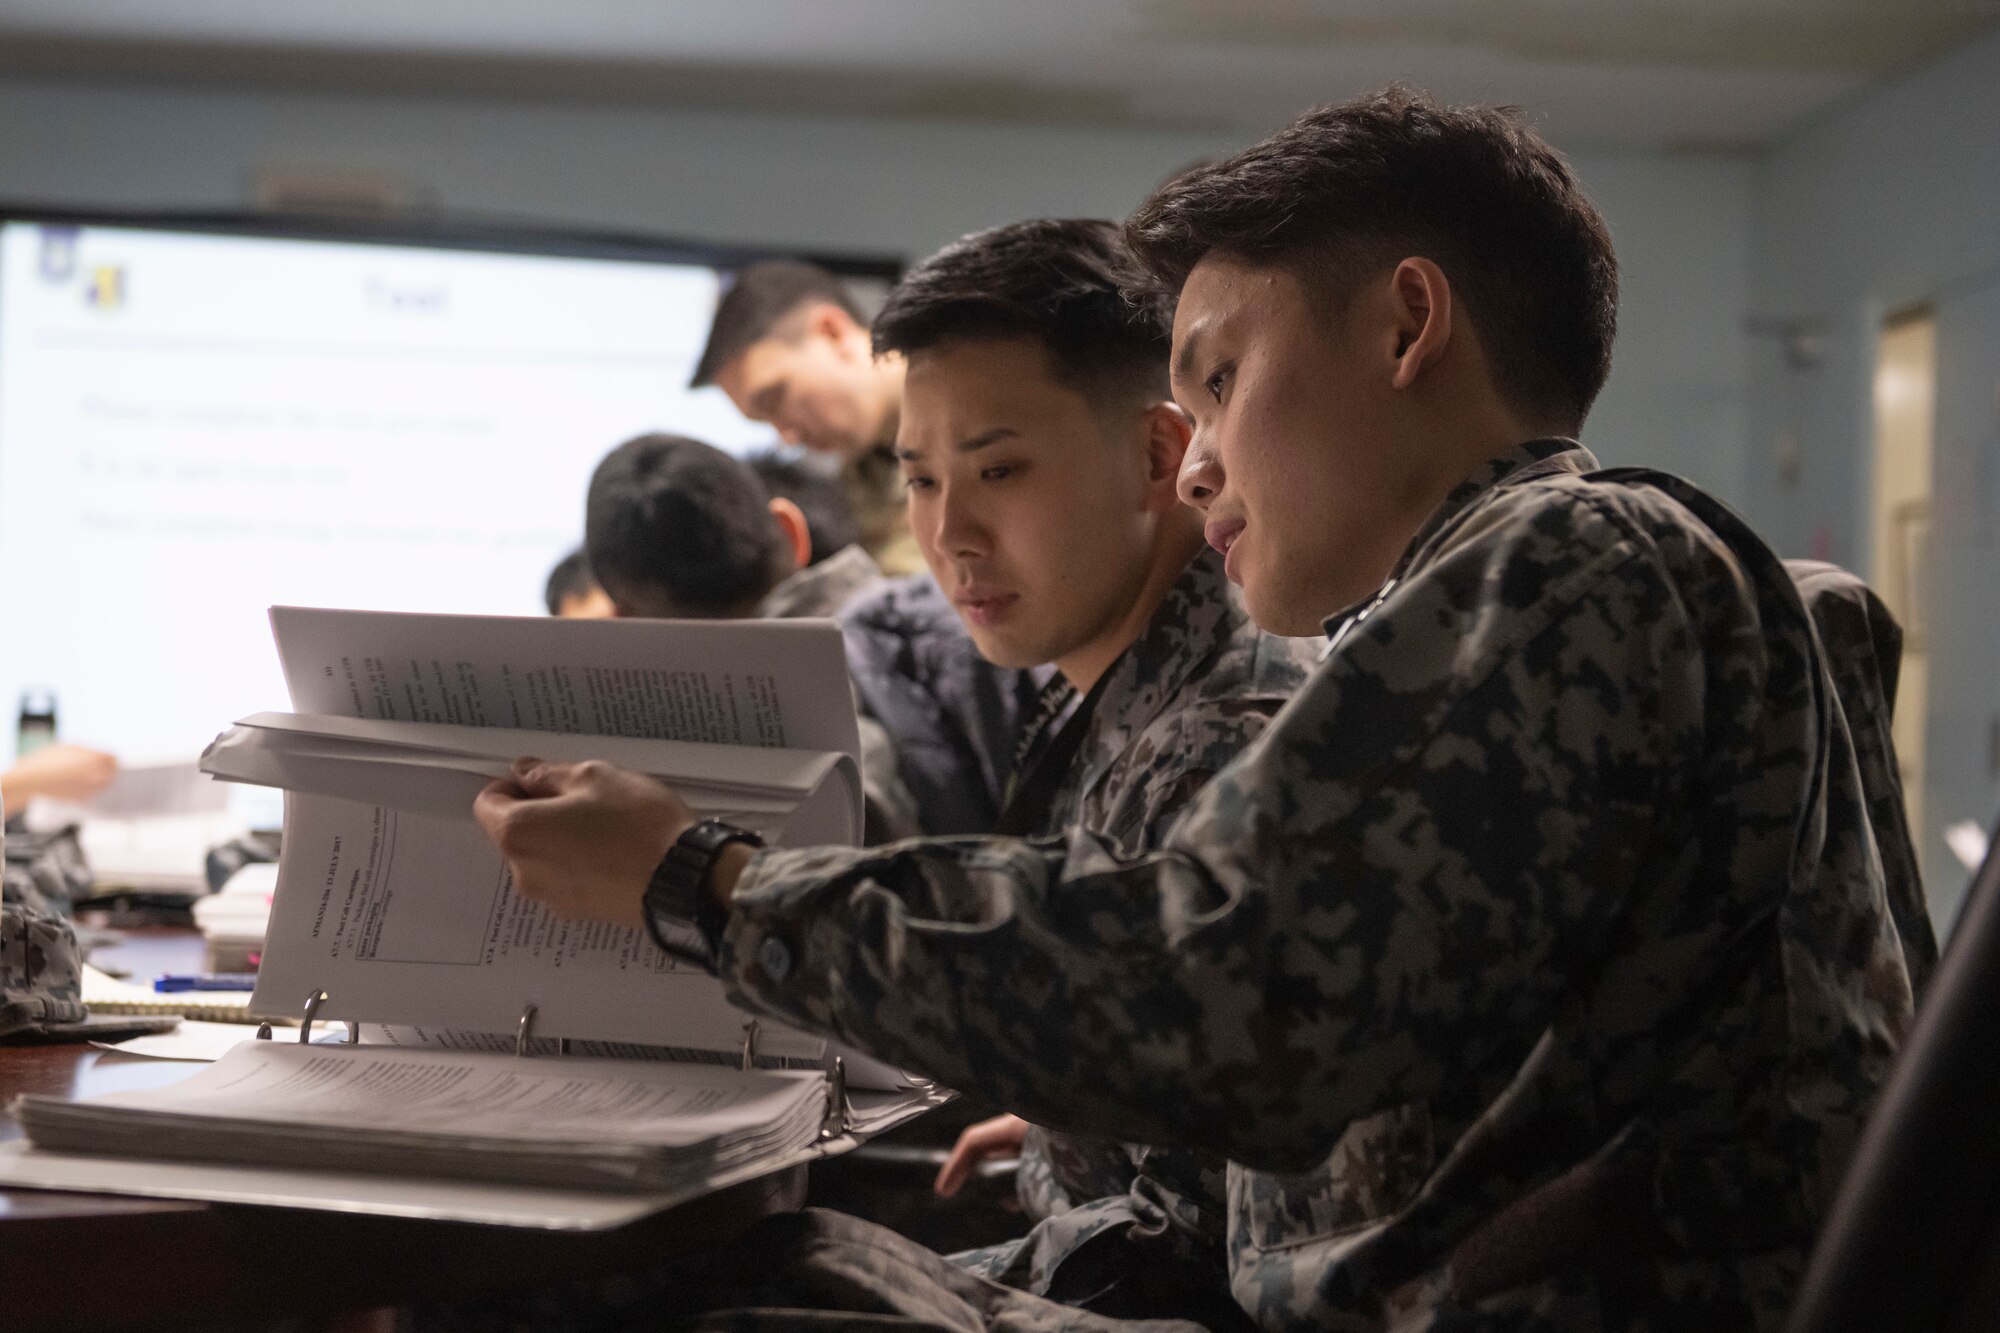 Japan Air Self-Defense Force (JASDF) Airmen flip through the pages of a test during a Multi-Capable Airman (MCA) course at Misawa Air Base, Japan, March 5, 2024.